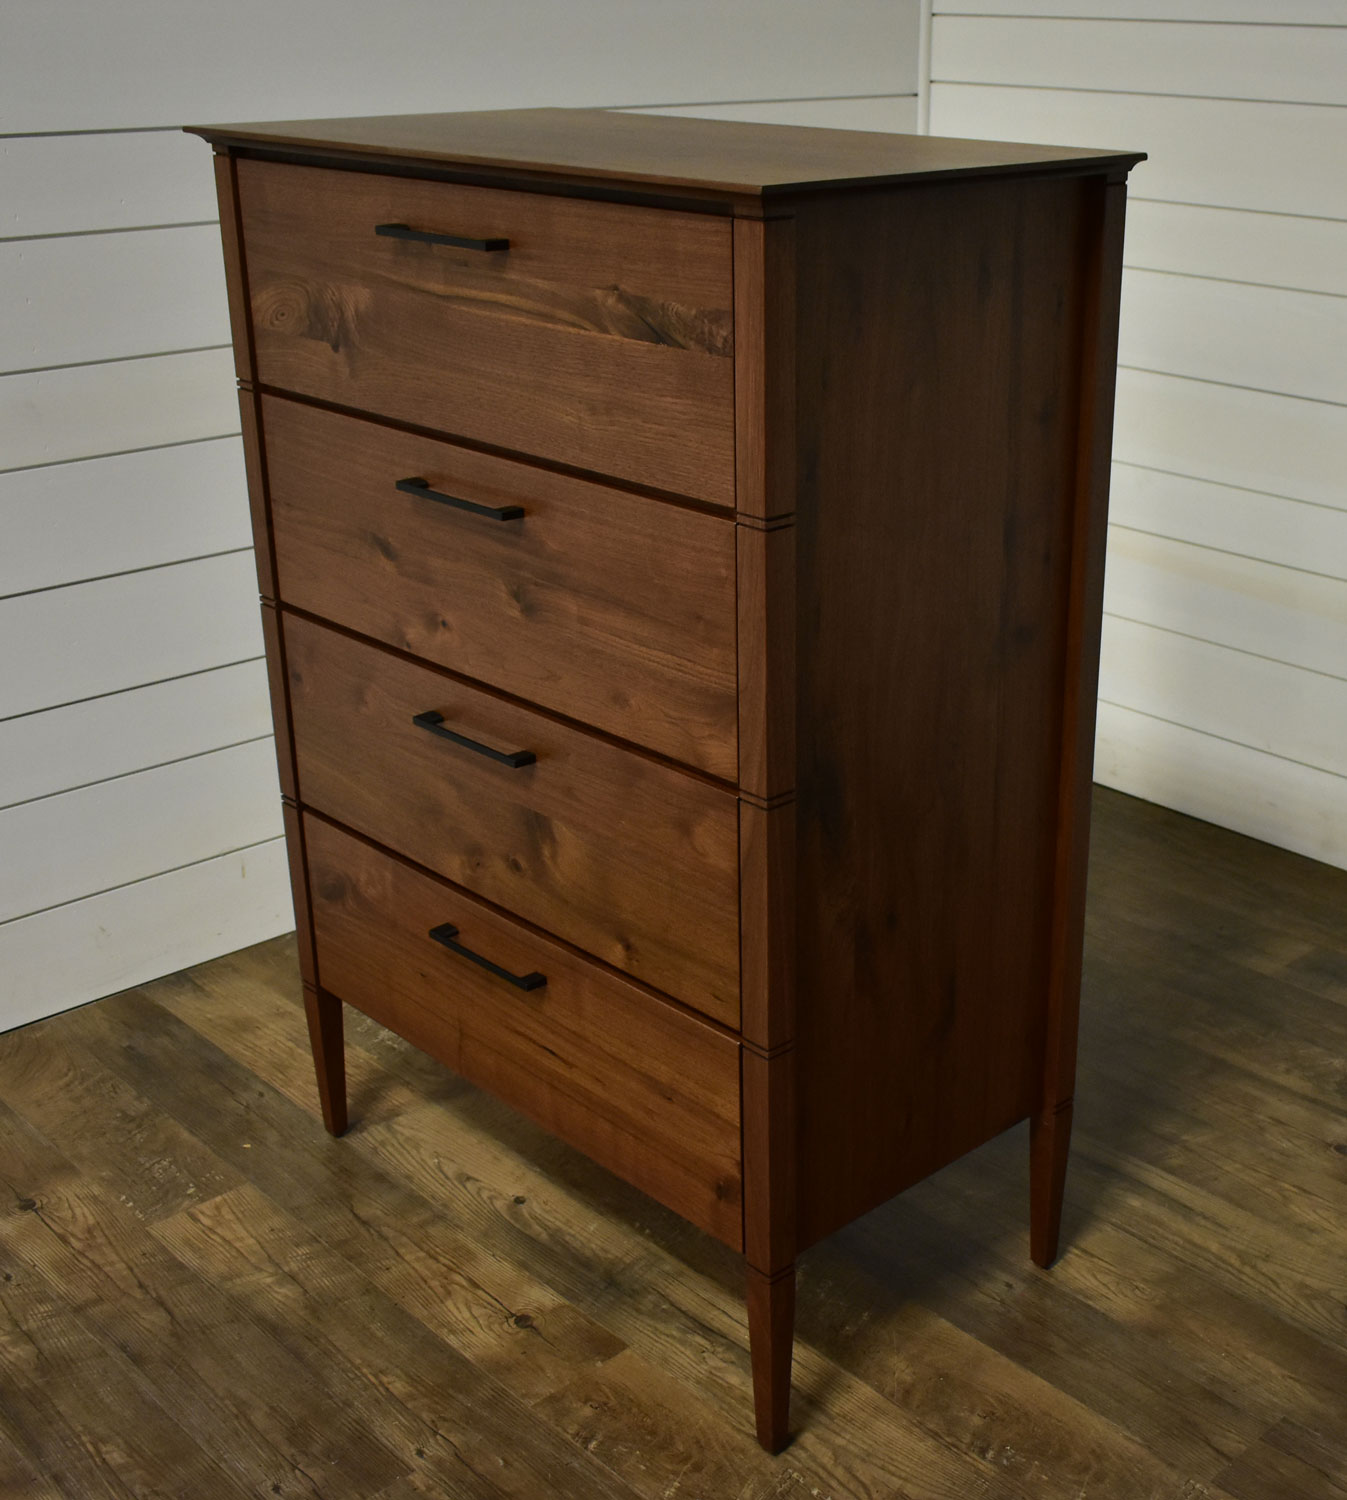 Reveal 4-Drawer Chest in Rustic Walnut